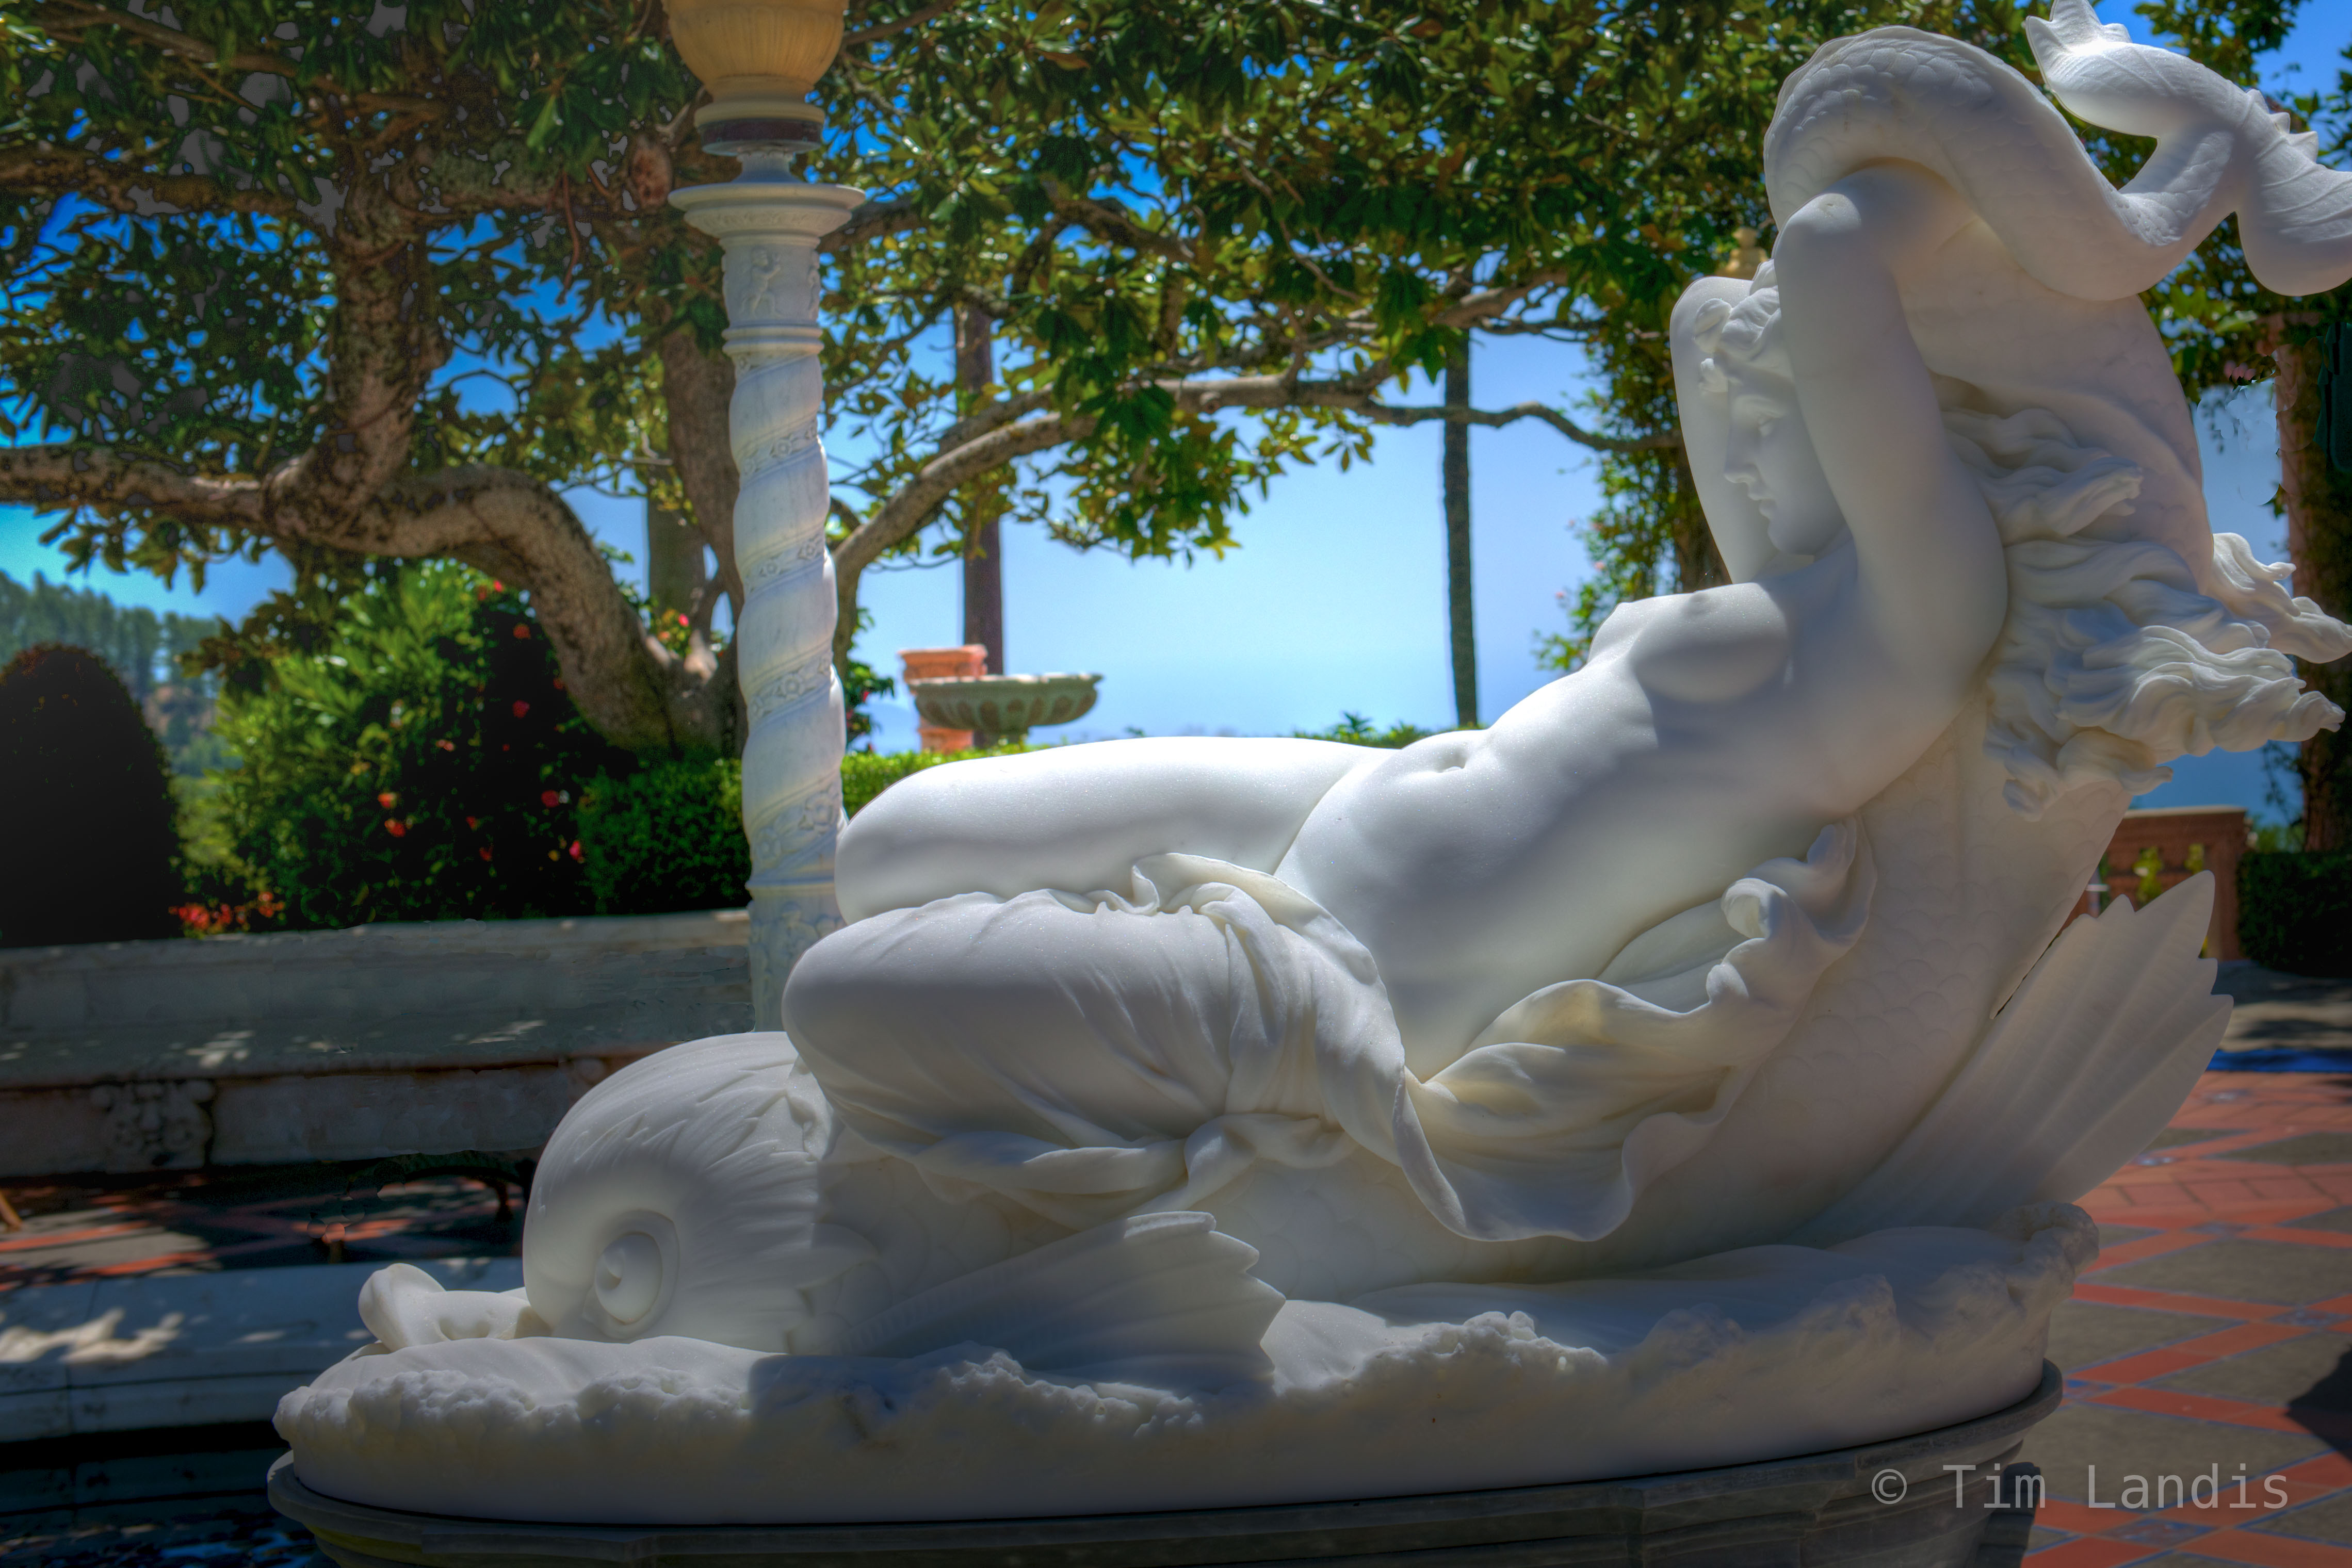 A nearly flawless piece of marble is carved into a sensual statue reclining by the pool